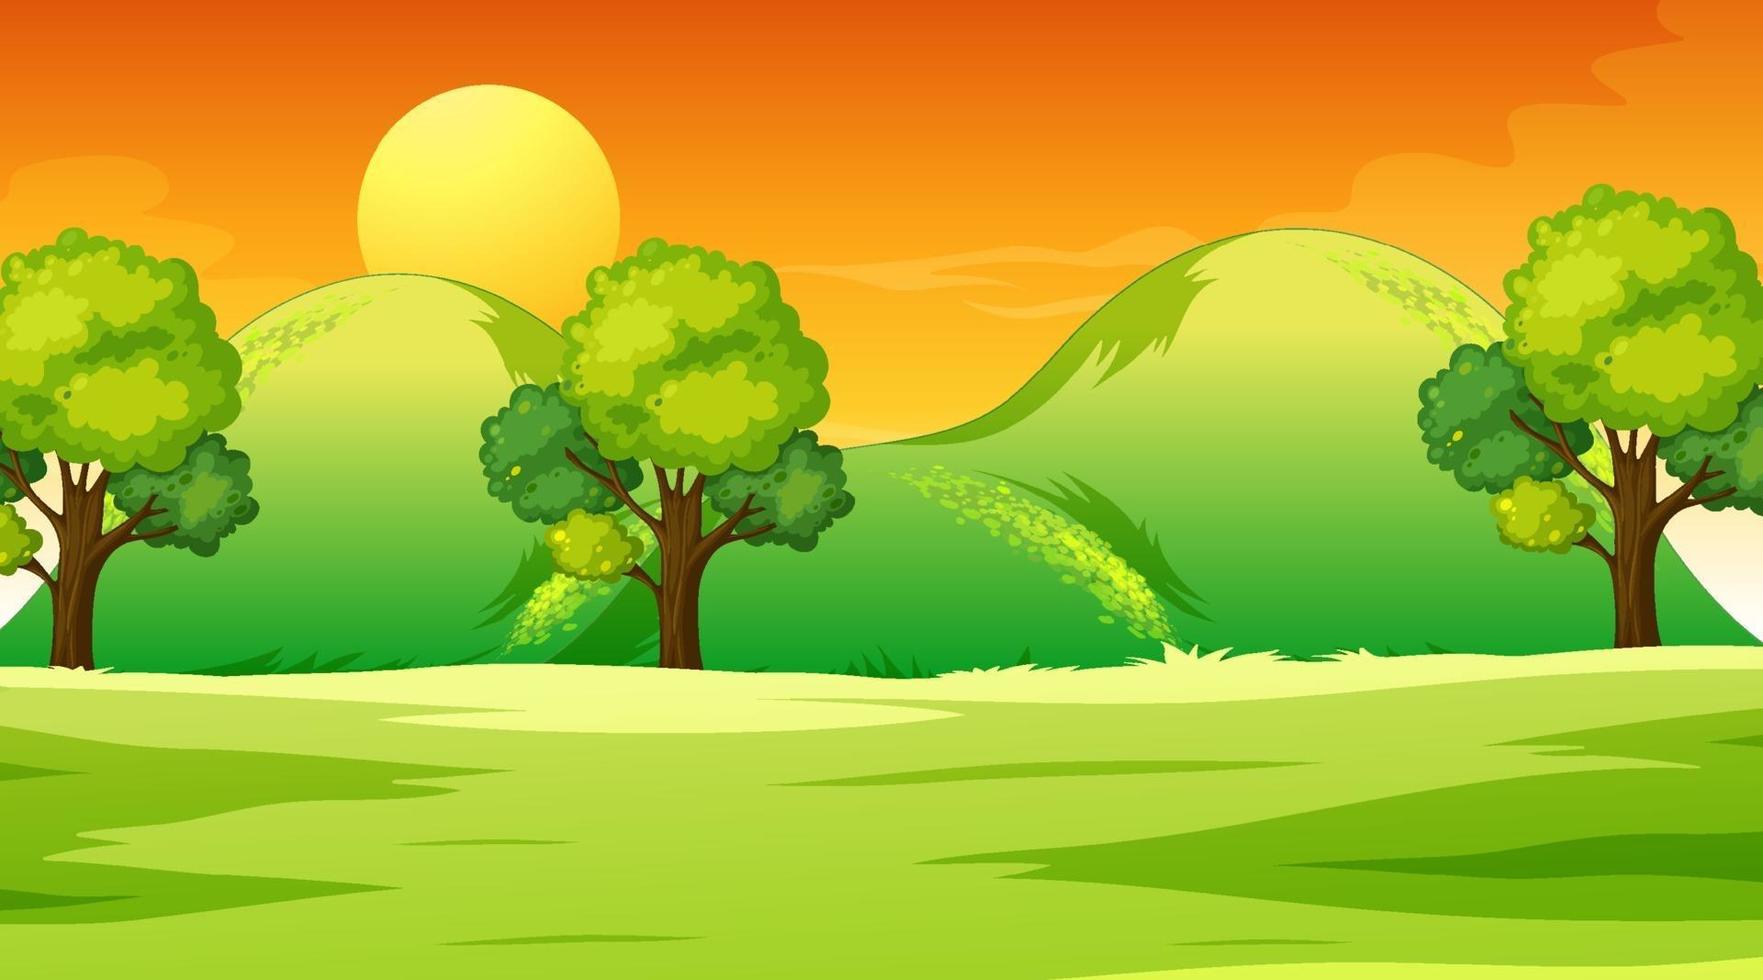 Blank meadow landscape scene at sunset time vector